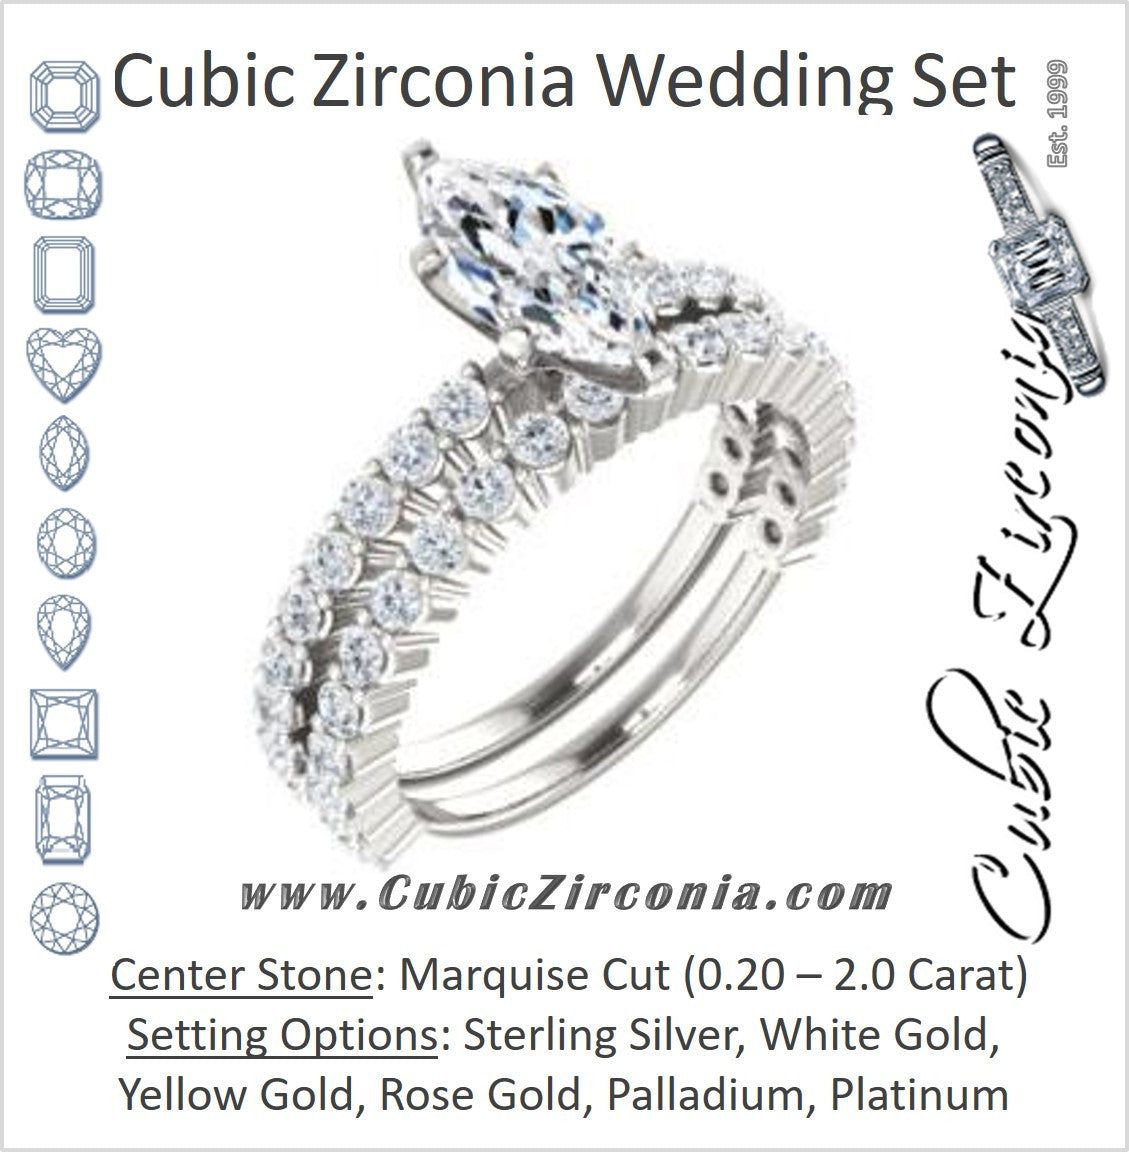 CZ Wedding Set, featuring The Thea engagement ring (Customizable 8-prong Marquise Cut Design with Thin, Stackable Pavé Band)